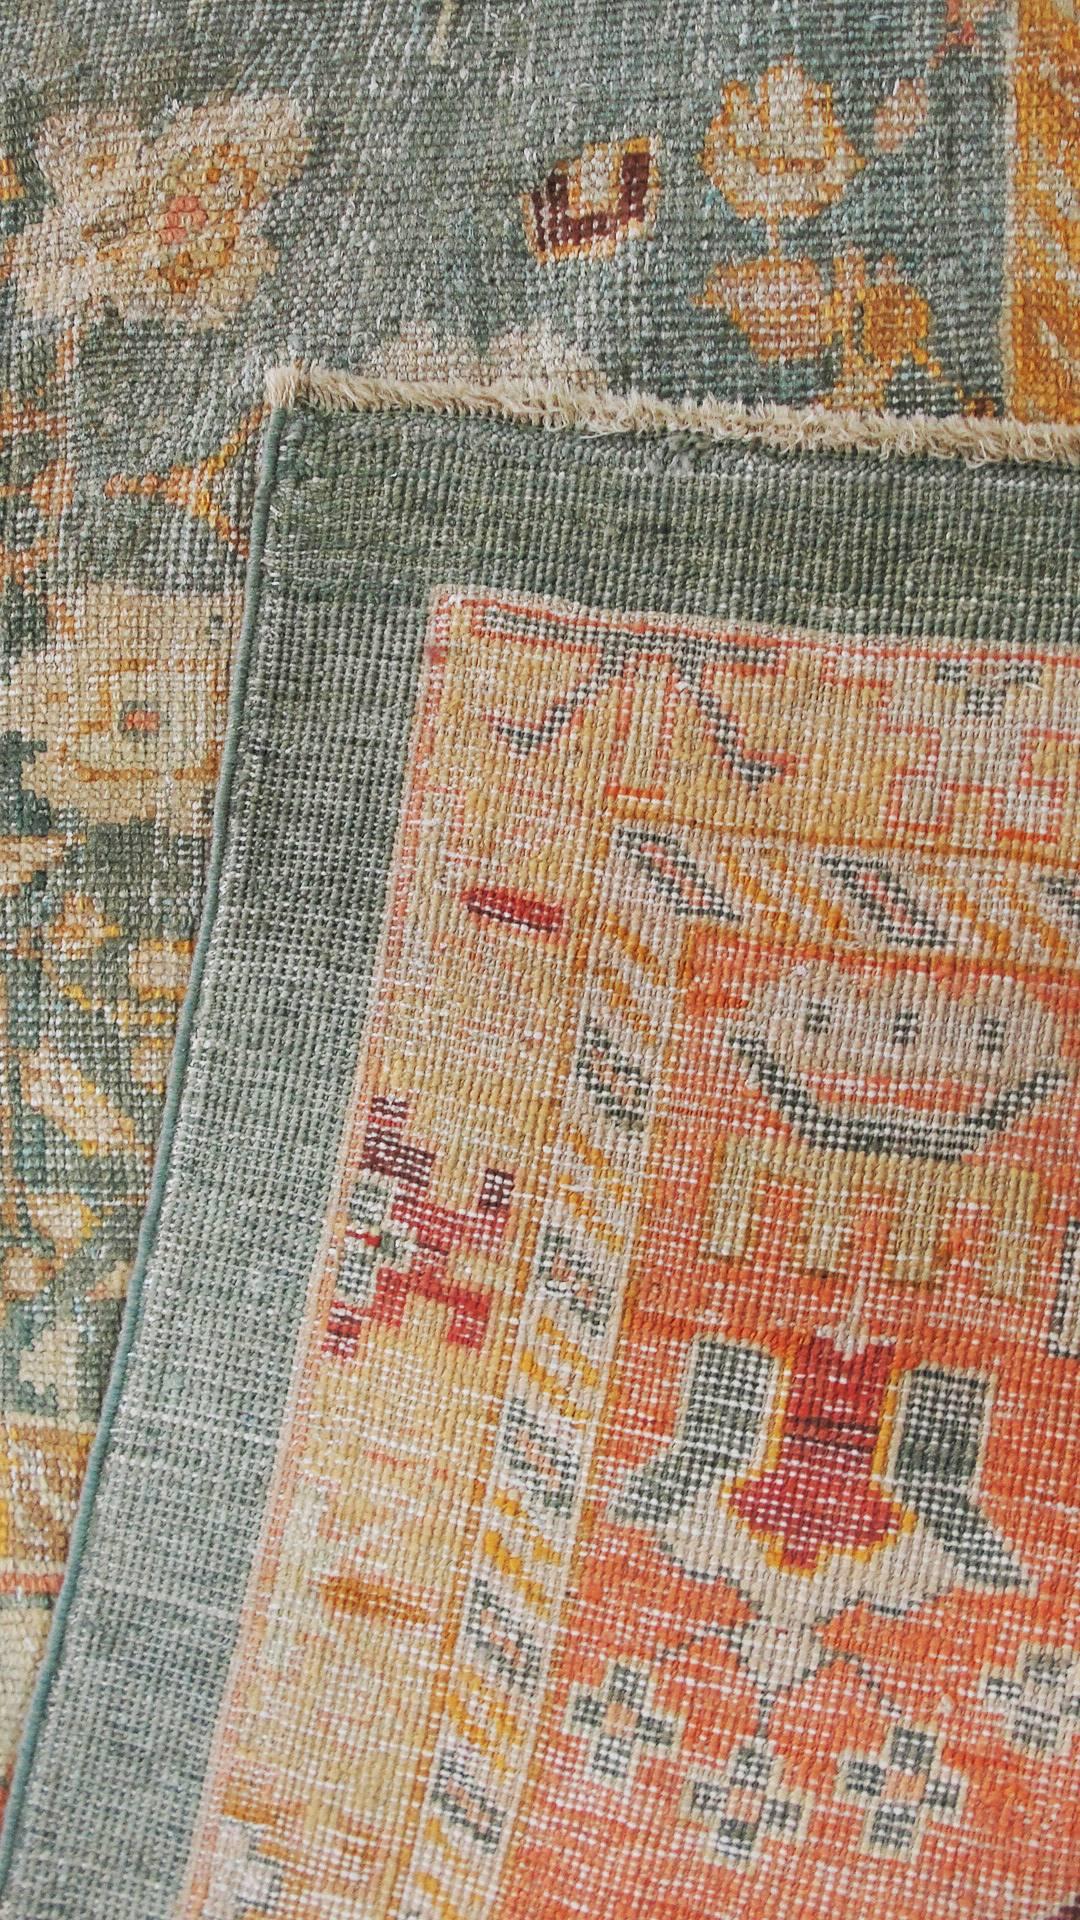 Pleasant and amazing antique Oushak carpet with unique colors and excellent size with great fine weave.
 Ushak rugs have been in production since the 15th century with superb wool and natural dyes. Unlike other Turkish rugs, Ushak rugs influenced